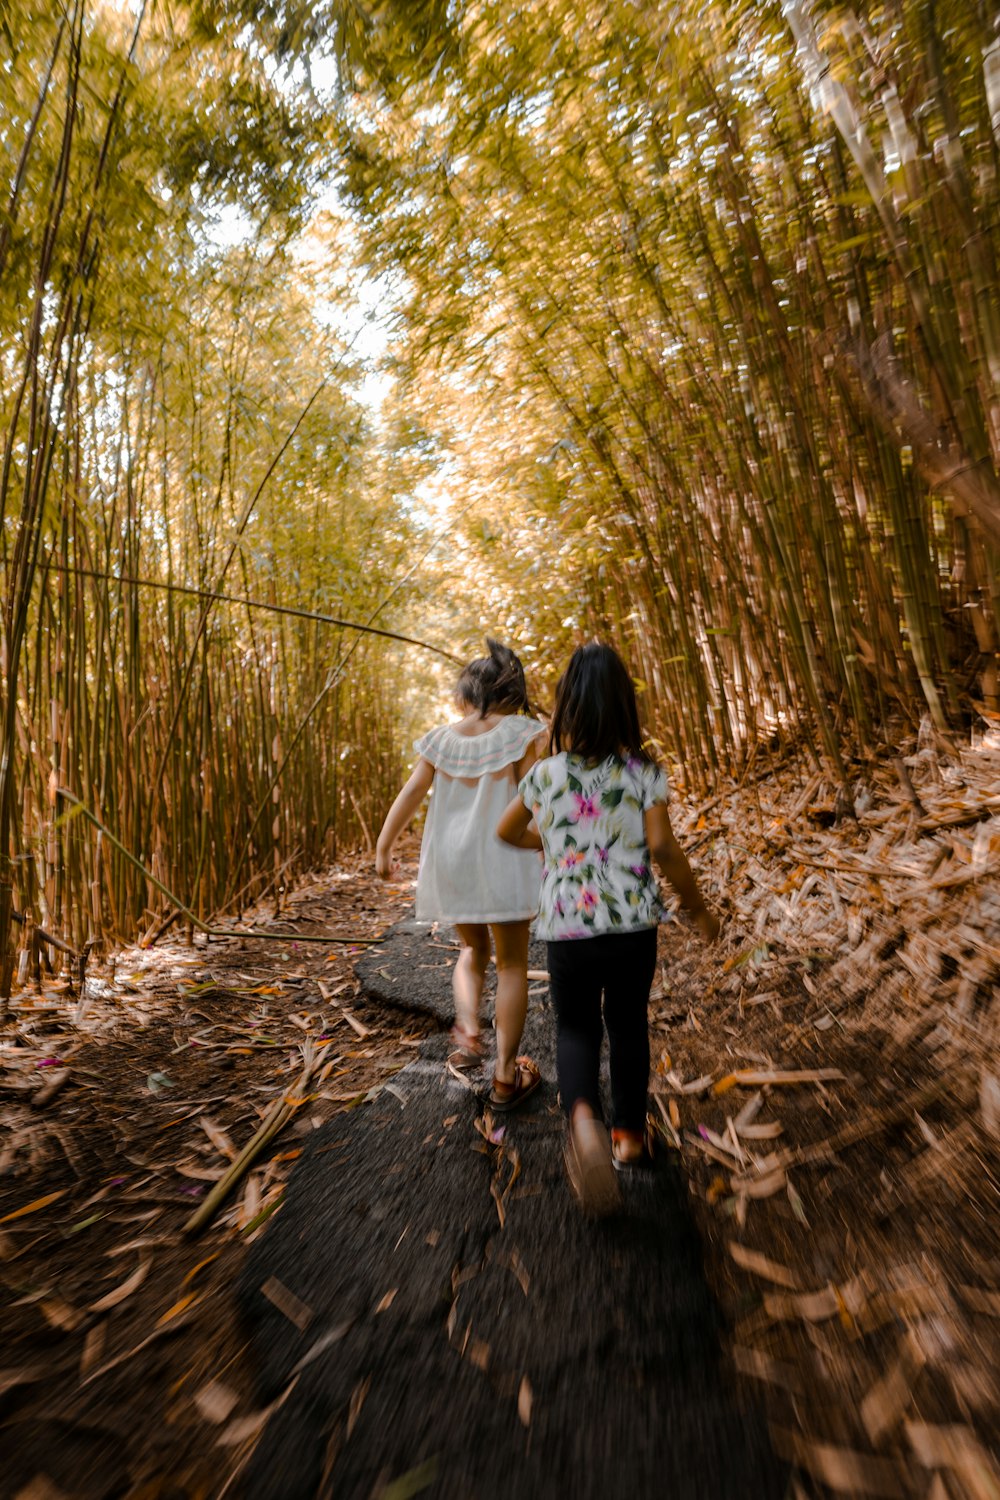 two little girls walking down a path in a bamboo forest